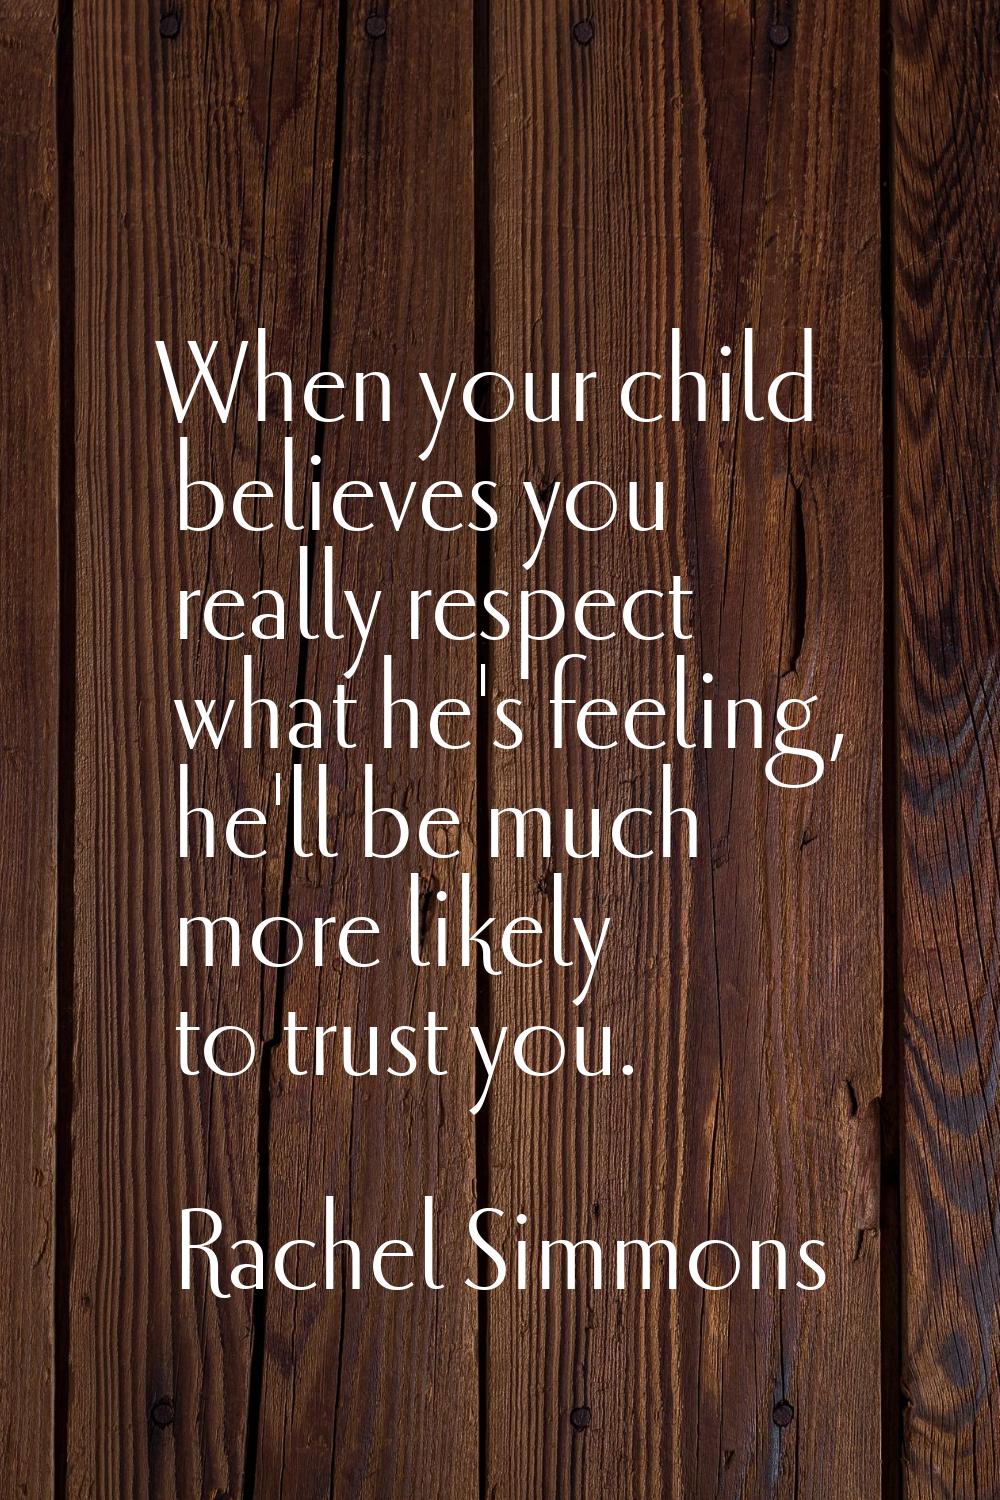 When your child believes you really respect what he's feeling, he'll be much more likely to trust y